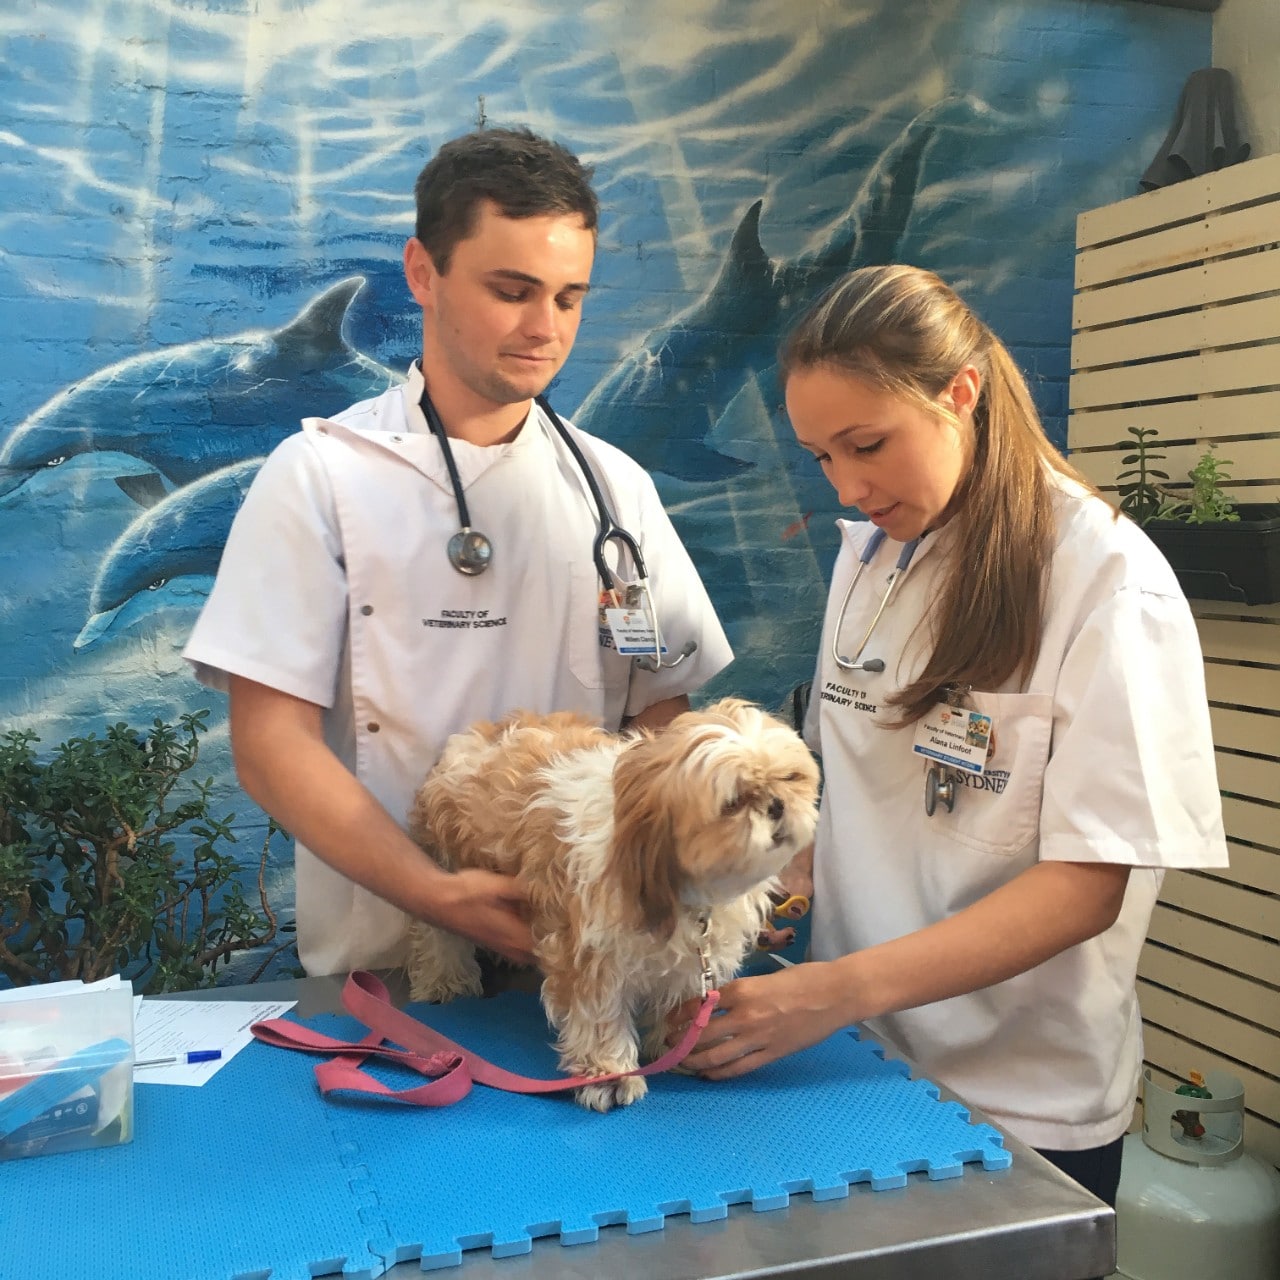 Final-year veterinary students treating a patient